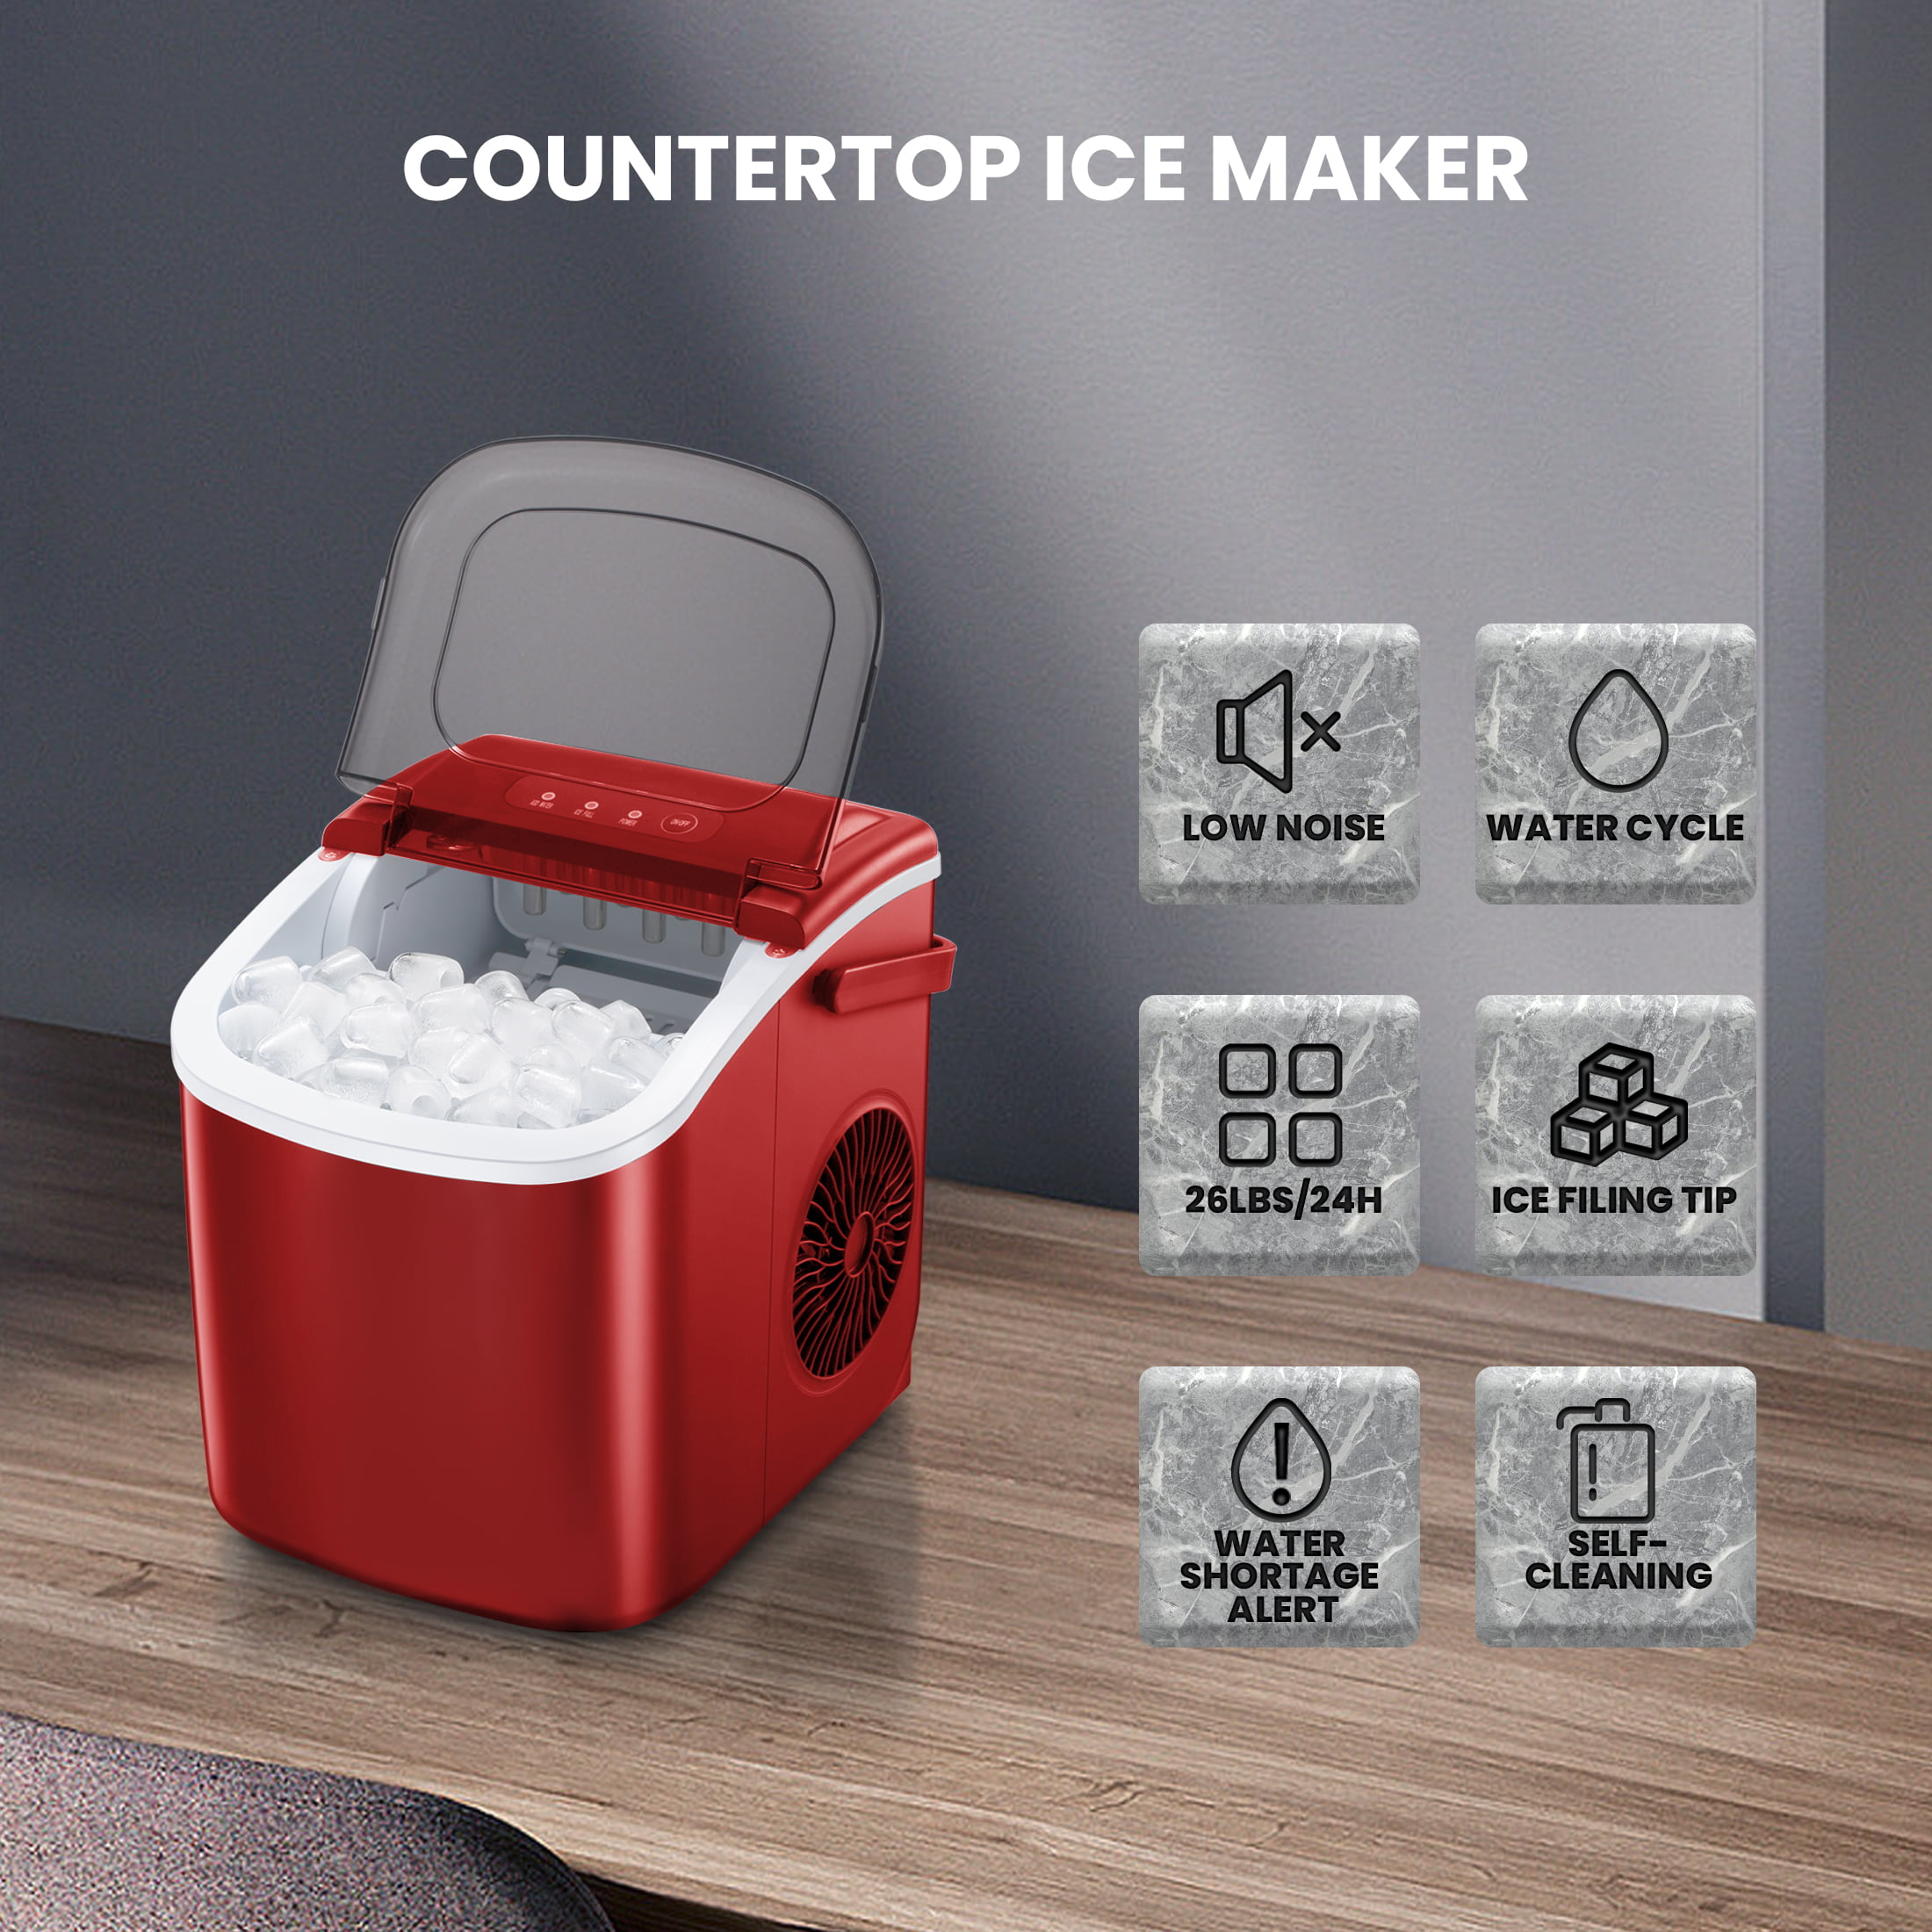 PanHuiWen Small Countertop Ice Maker 9 Cubes Ready in 8 Mins 26lbs in 24H  Mini Ice Maker Machine 2 Sizes of Bullet Ice for Home Kitchen,Office,Bar,Red